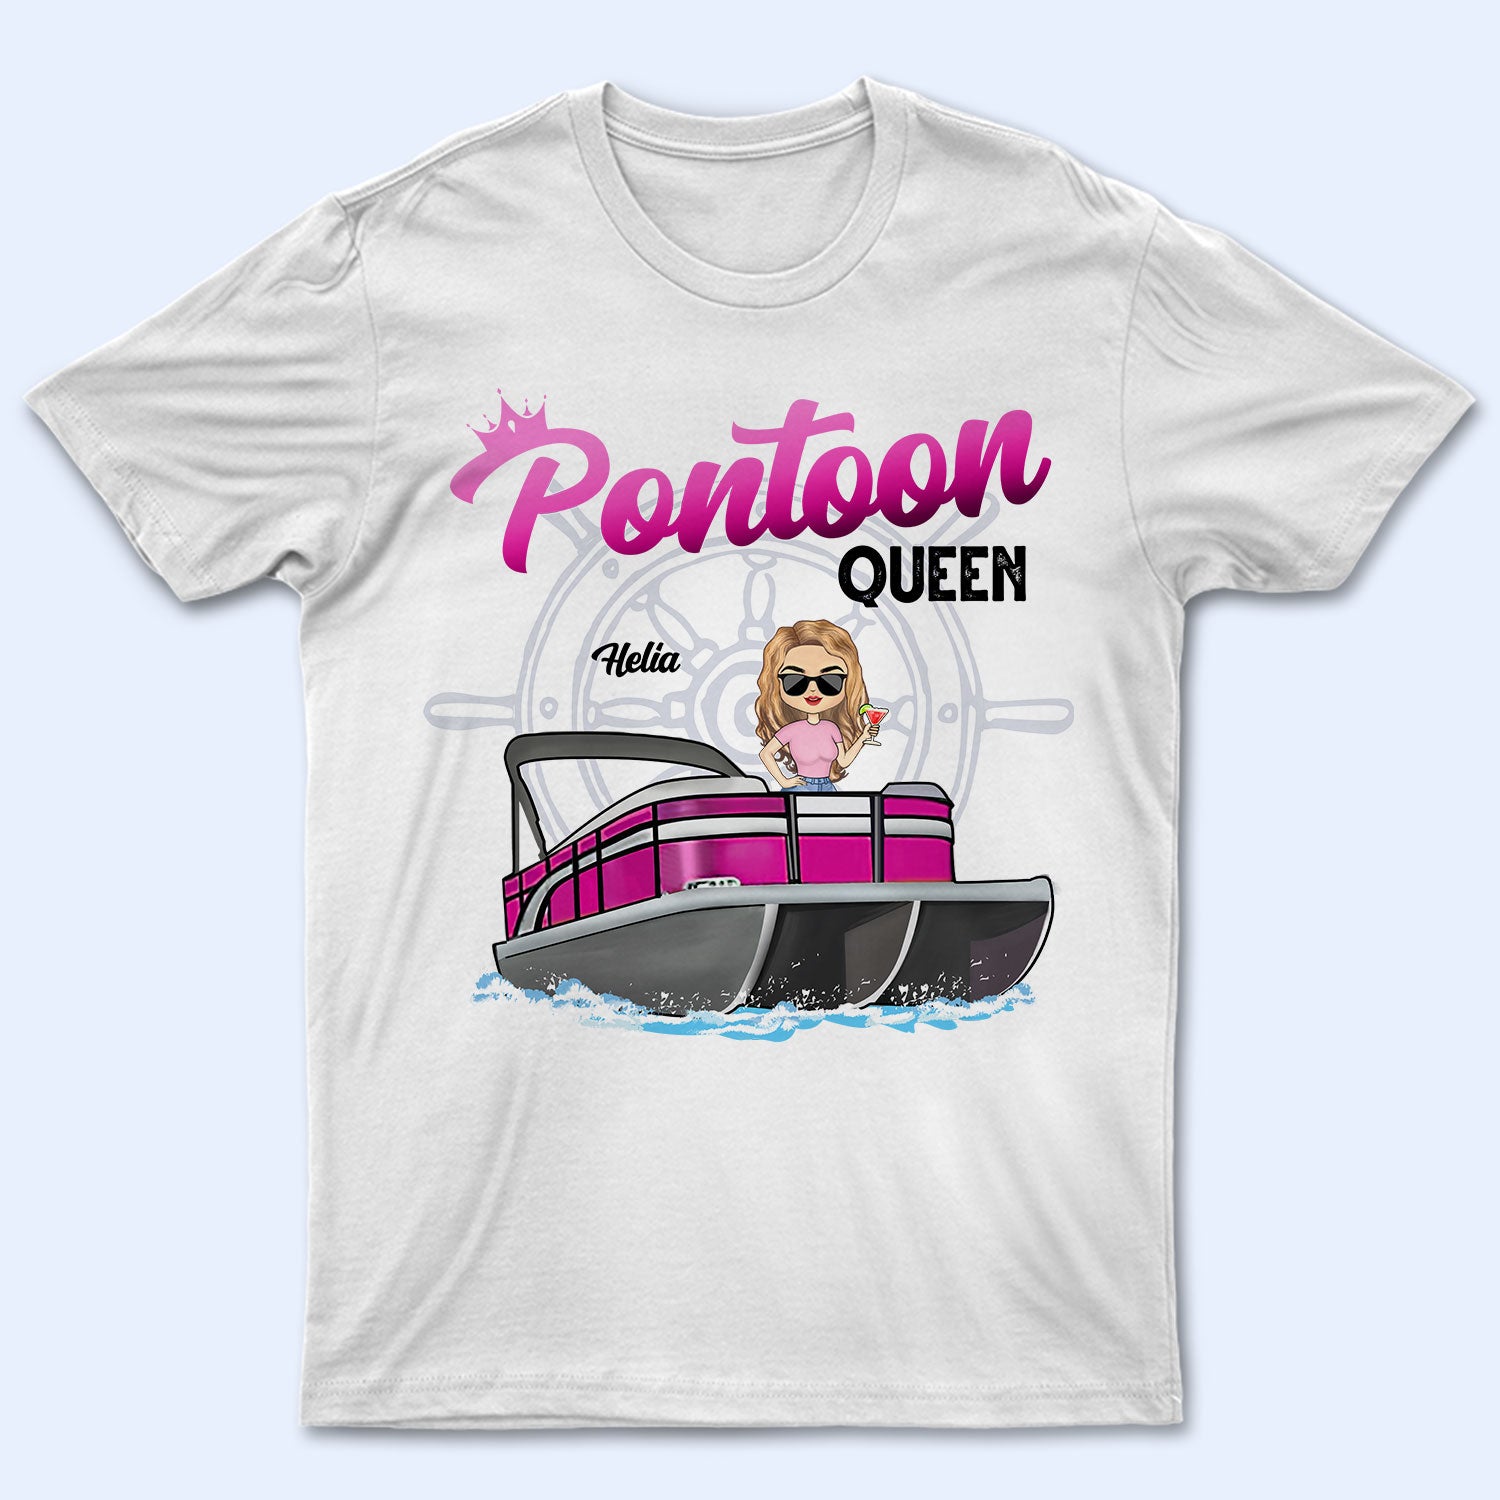 Boating Pontoon Queen - Birthday, Traveling, Cruising Gift For Pontooning Lovers, Beach Lovers, Travelers - Personalized Custom T Shirt